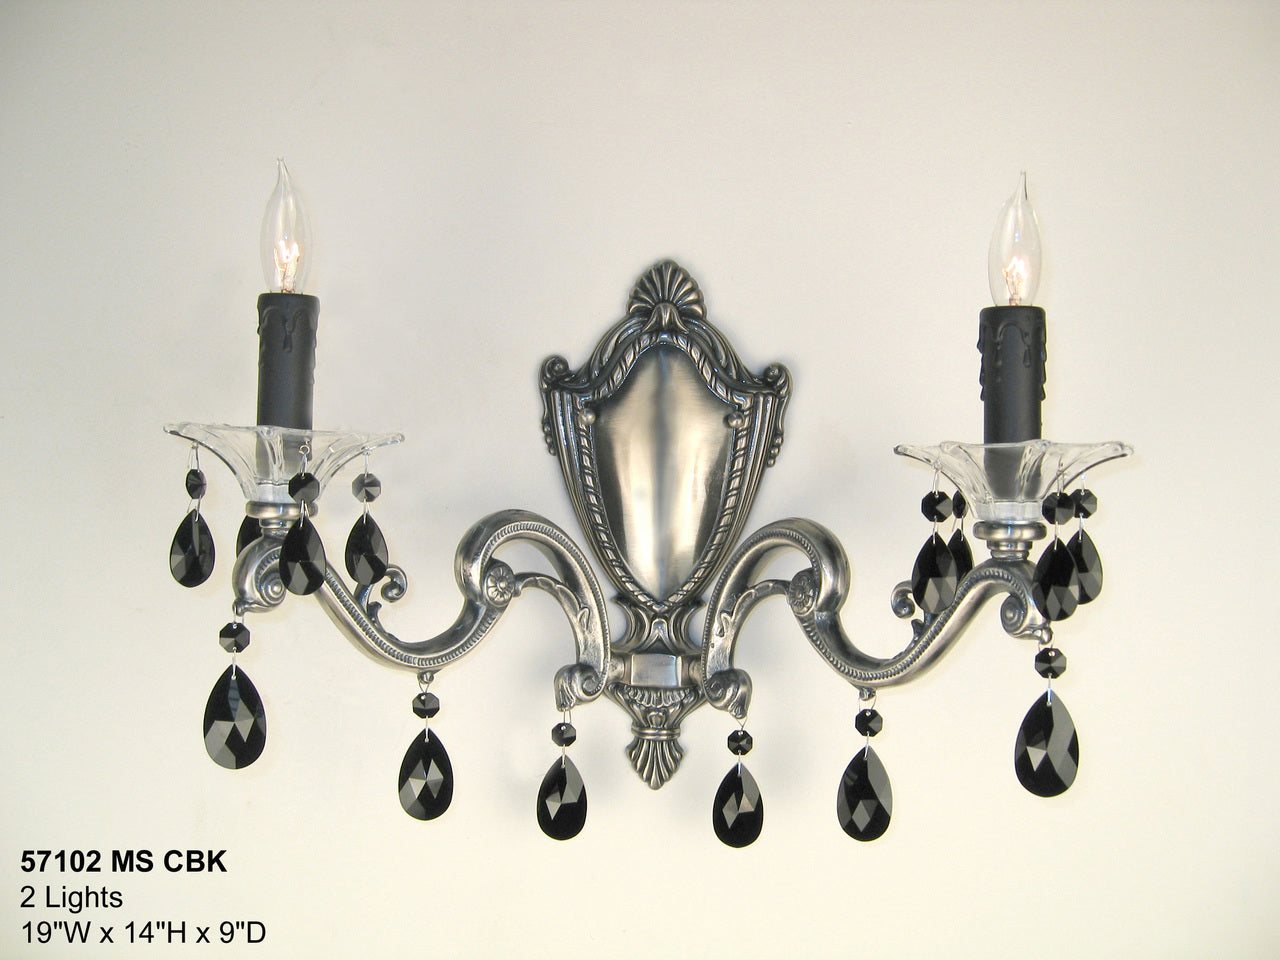 Classic Lighting 57102 MS CBK Via Firenze Crystal Wall Sconce in Millennium Silver (Imported from Spain)